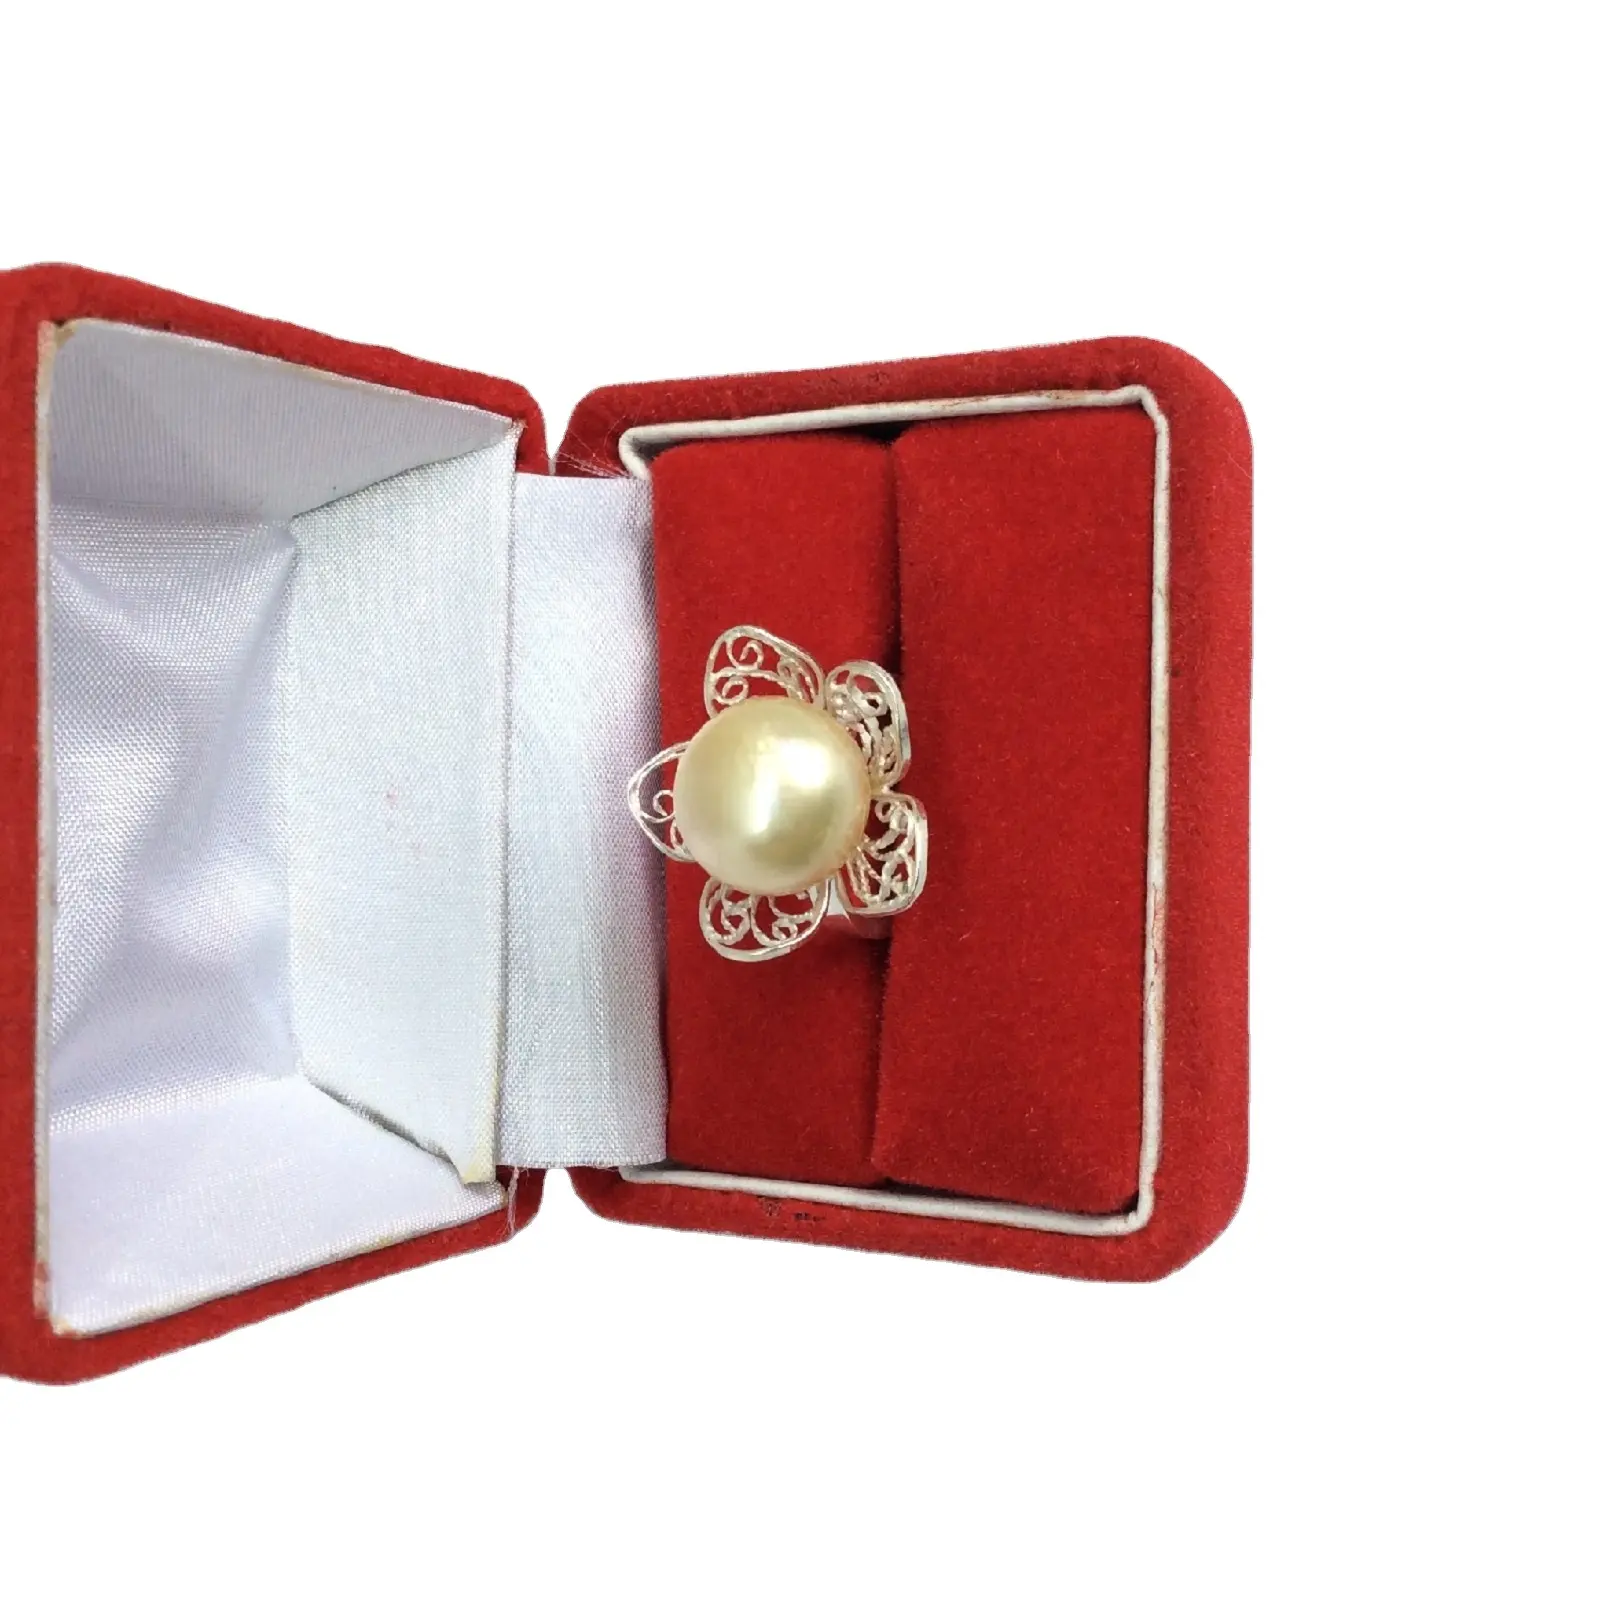 Customized Design Girls Sterling Silver Jewelry Ring Pearl Gemstone Natural Stone Crystal Ring For Export From Indonesia